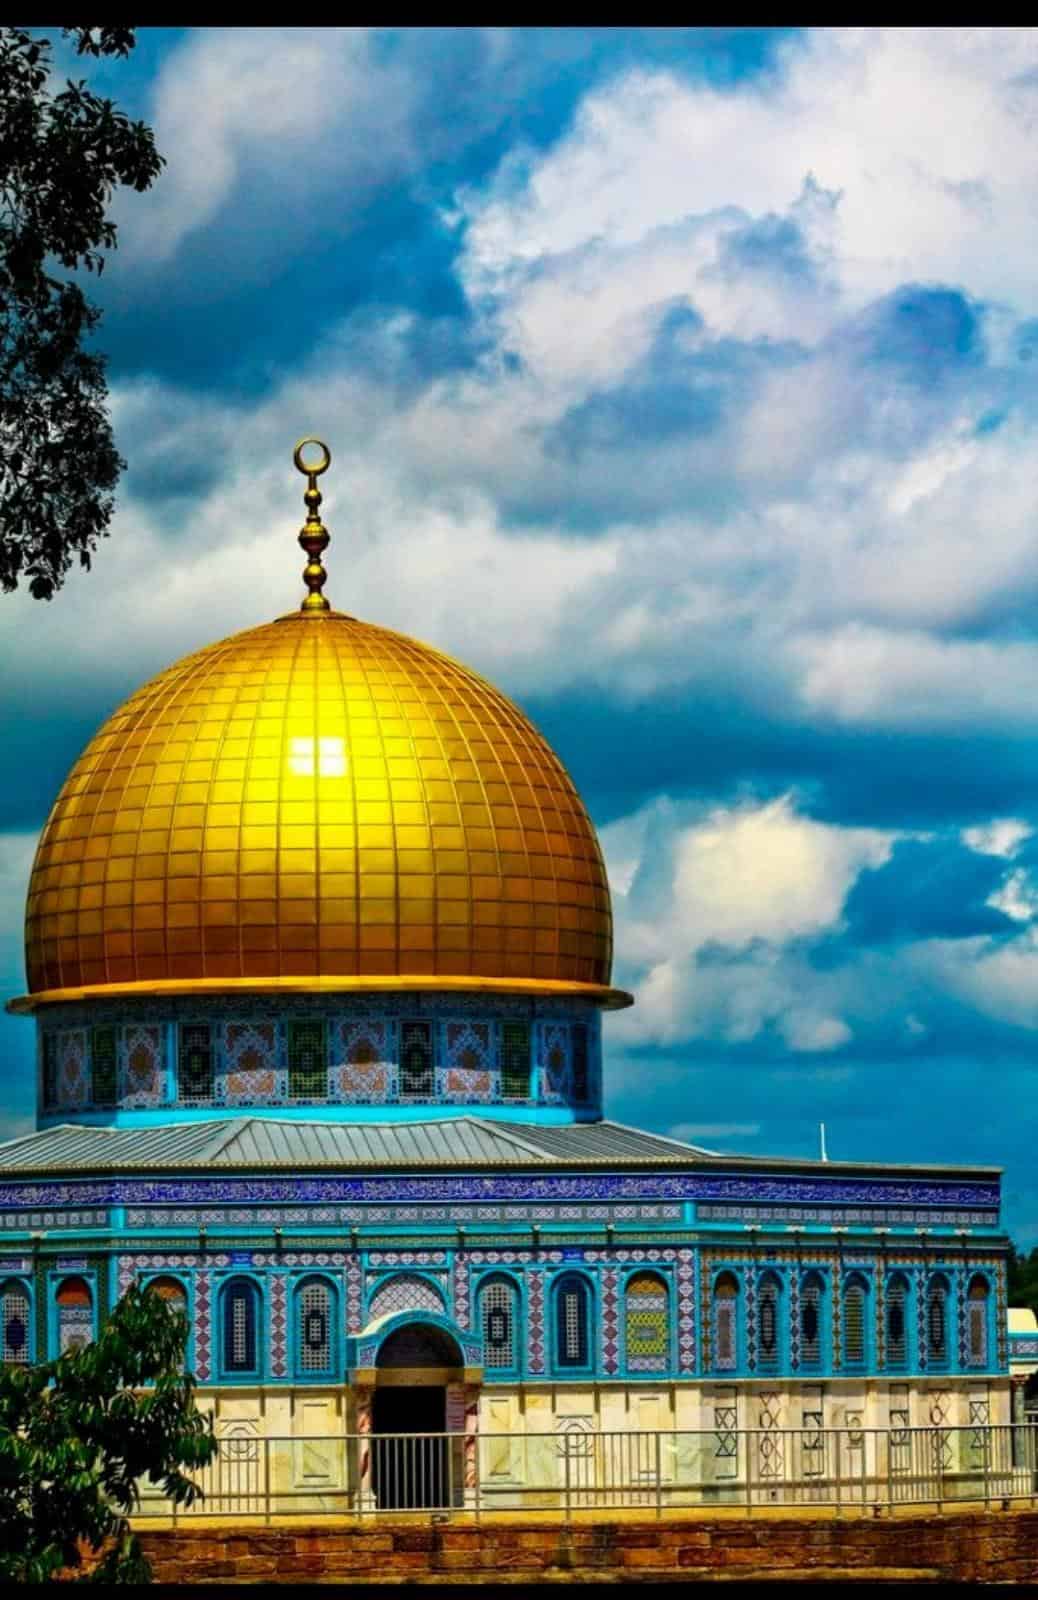 Palestine - the Islamic perspective